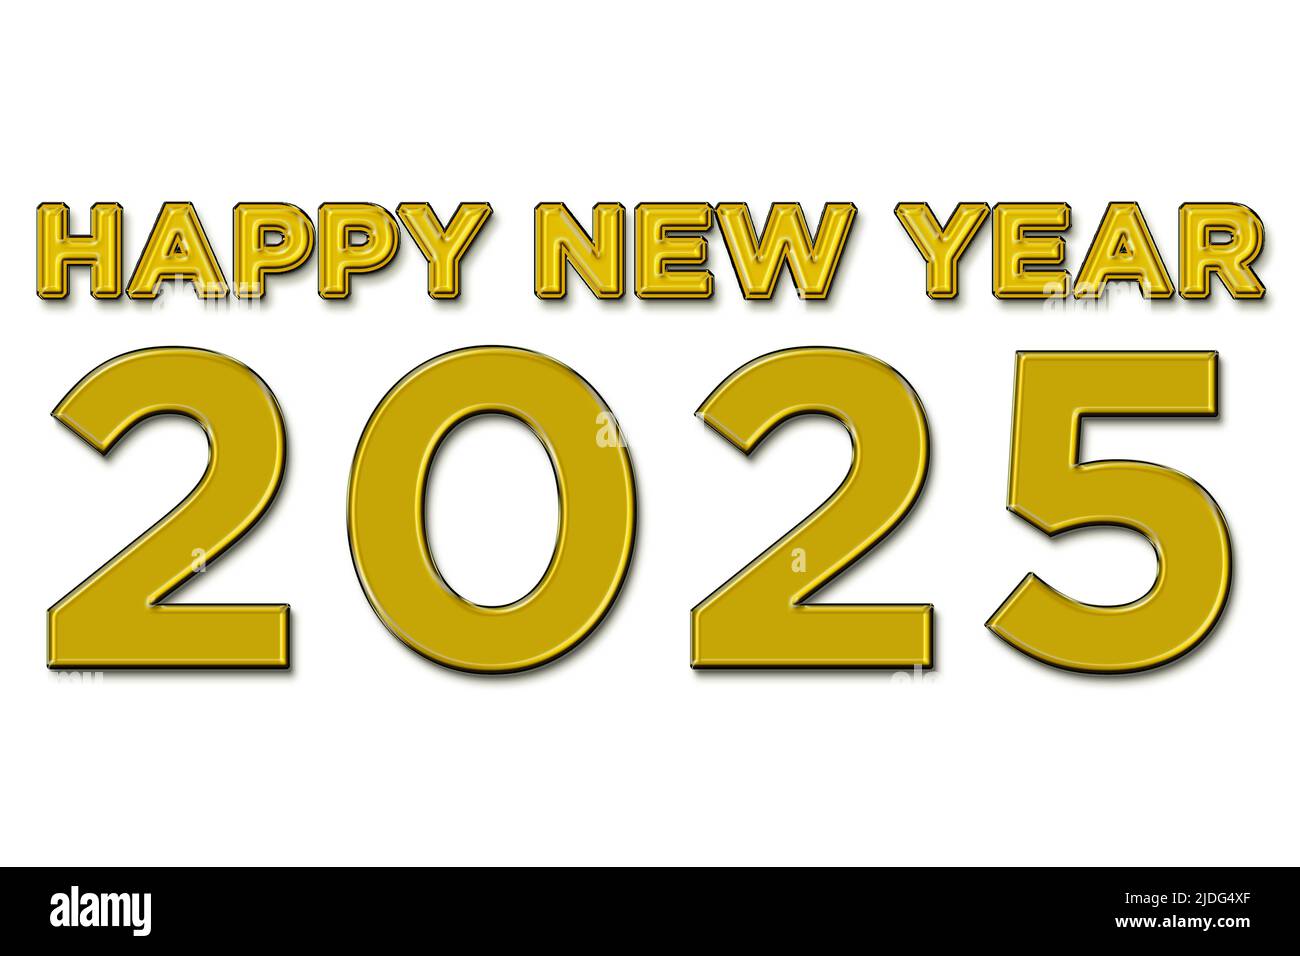 Happy new year 2025 illustration in yellow color text on white background Stock Photo